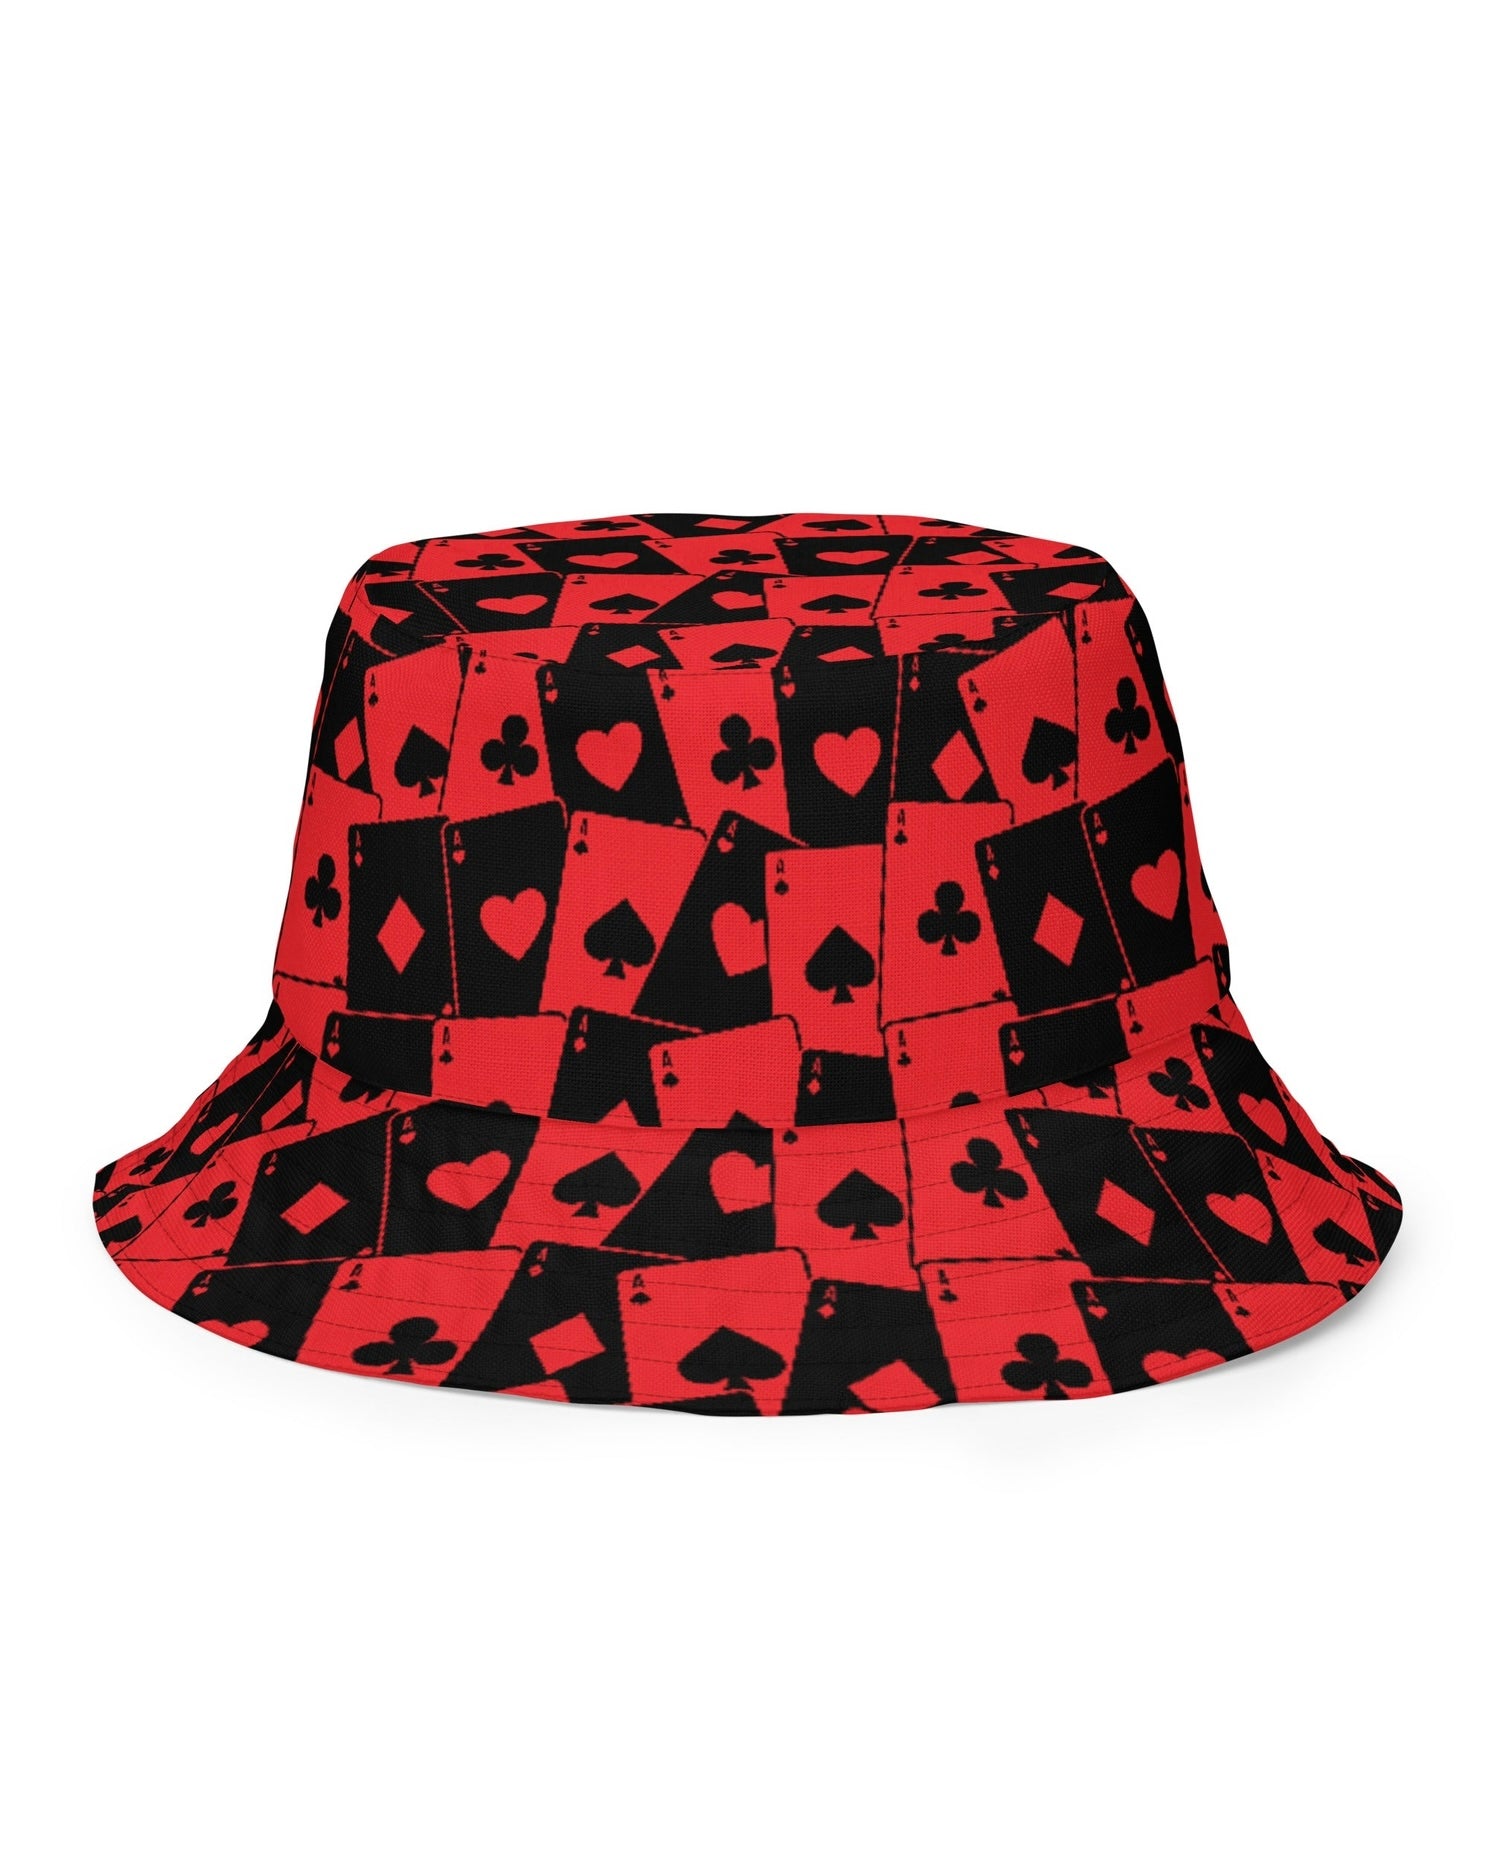 Ace Of Hearts / House Of Cards Reversible Bucket Hat, Bucket Hat, - One Stop Rave